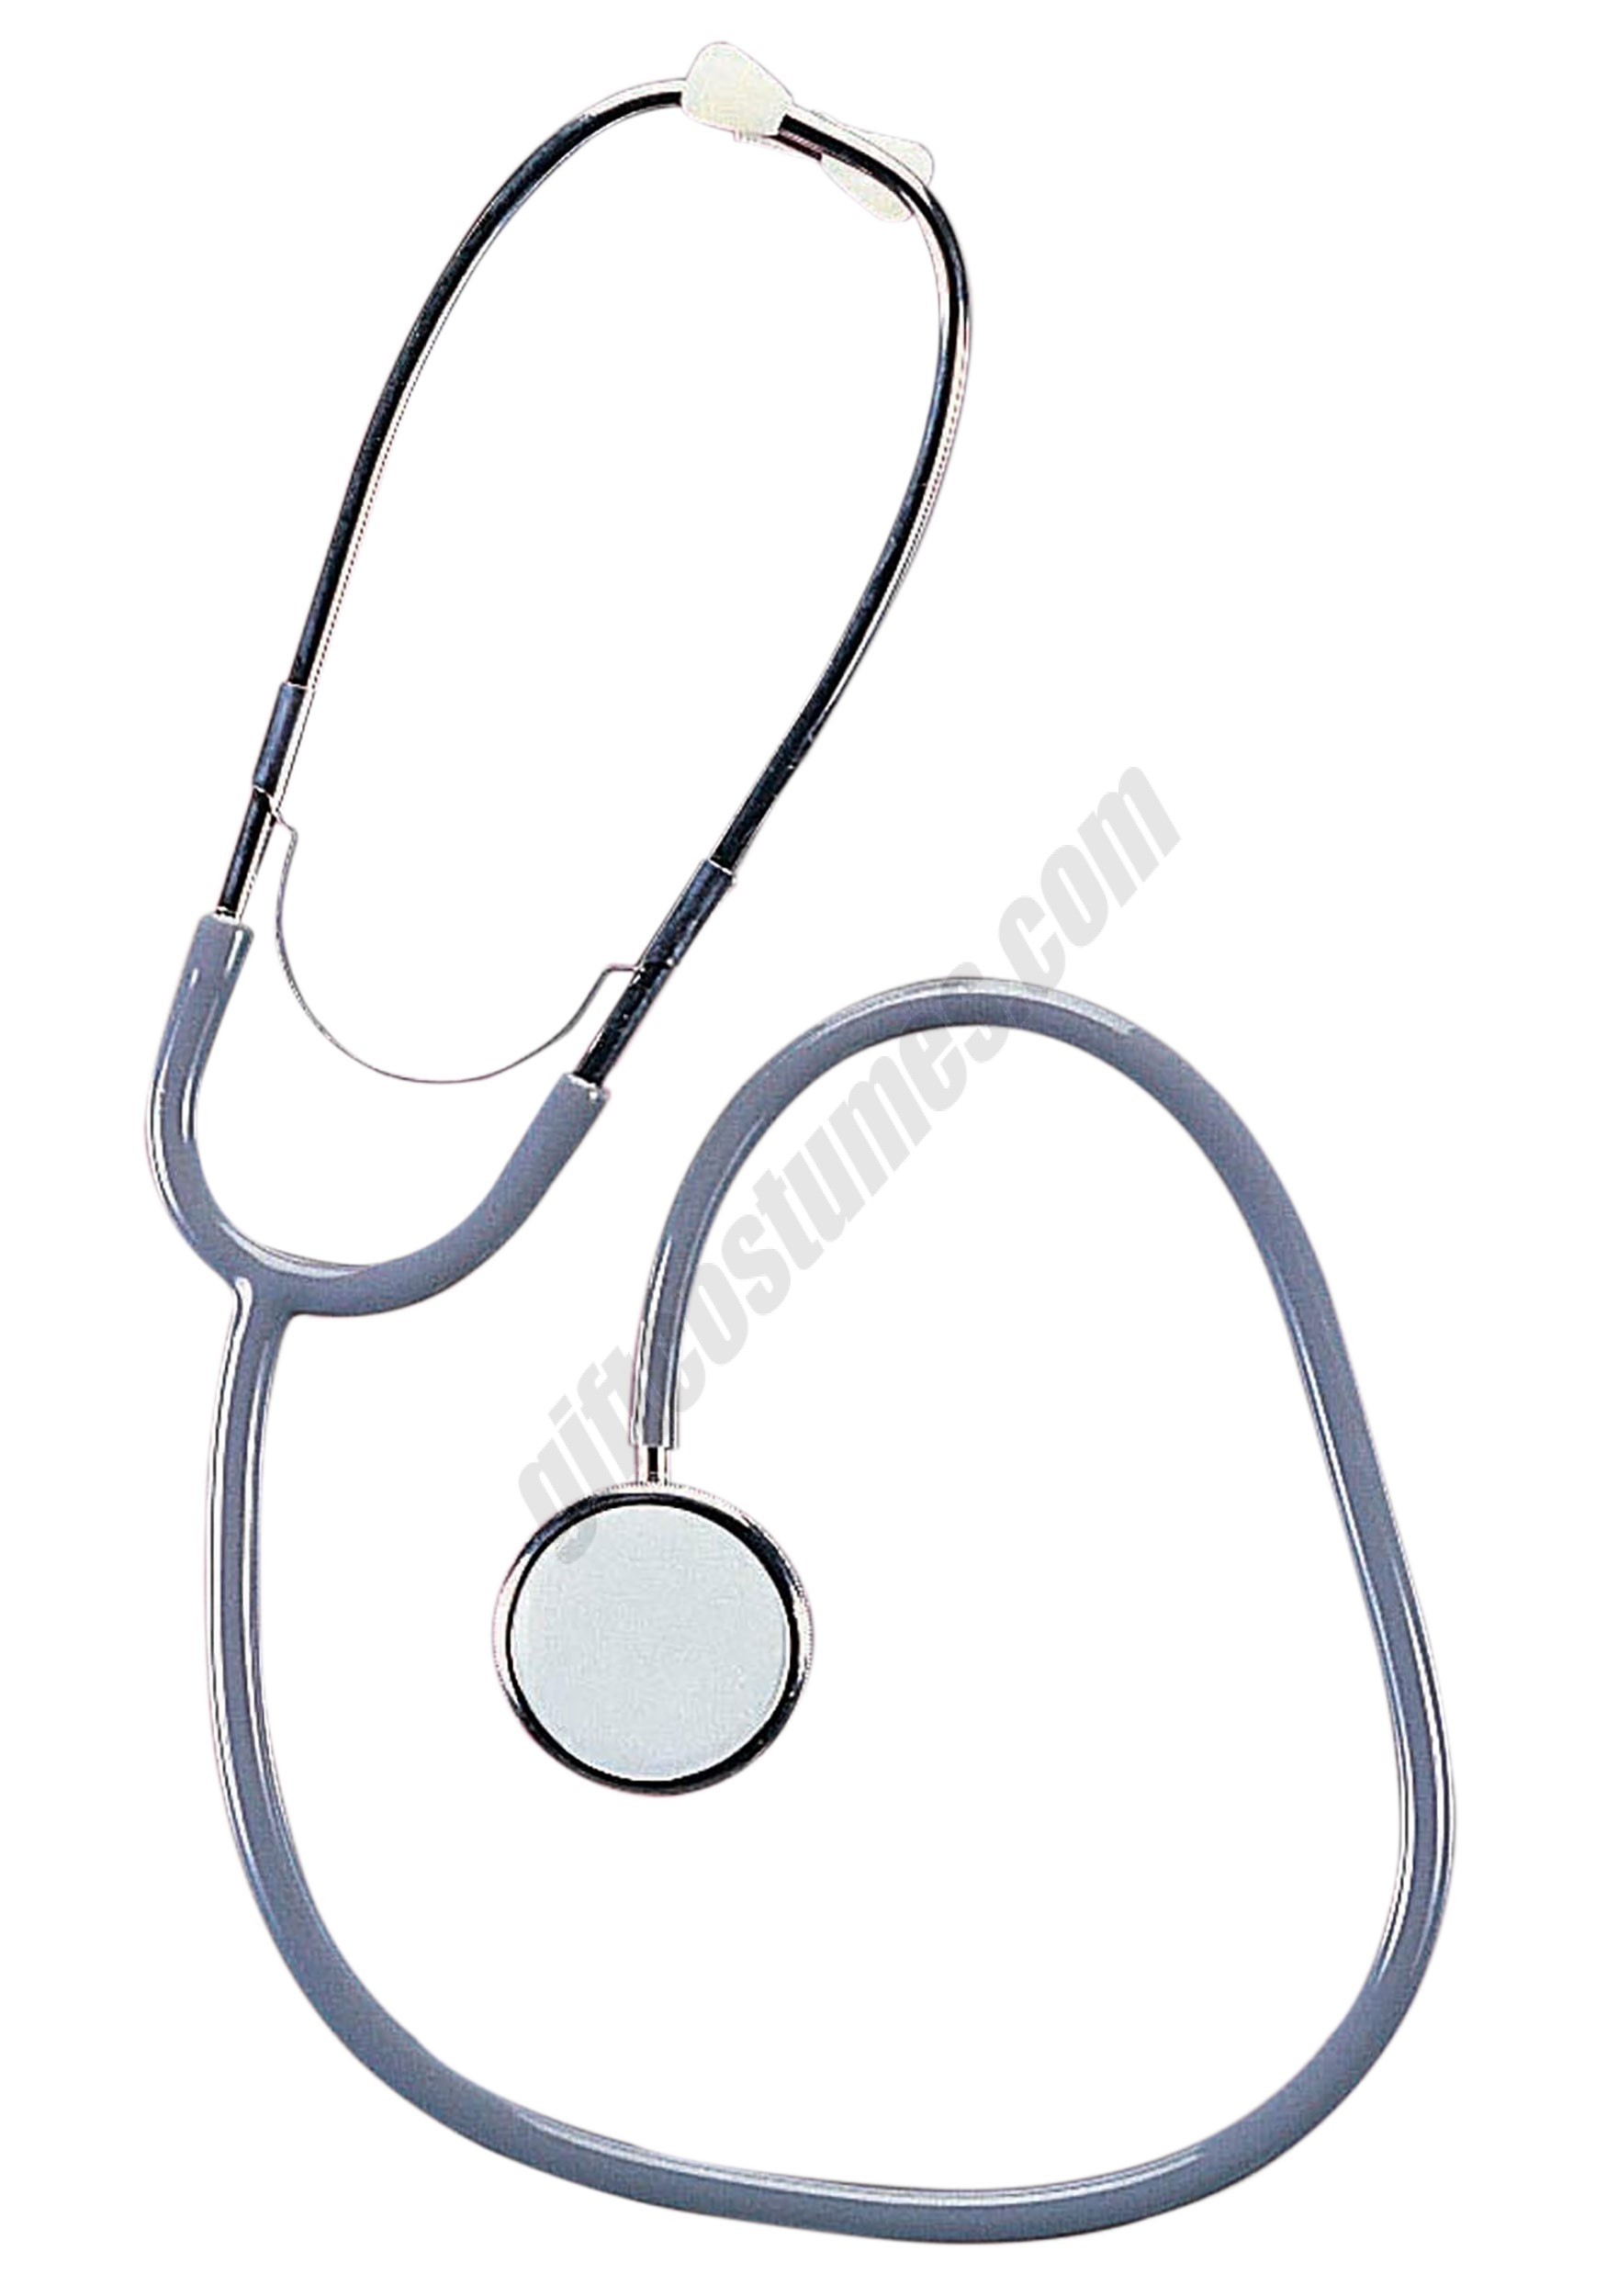 Deluxe Doctor Stethoscope Promotions - Deluxe Doctor Stethoscope Promotions